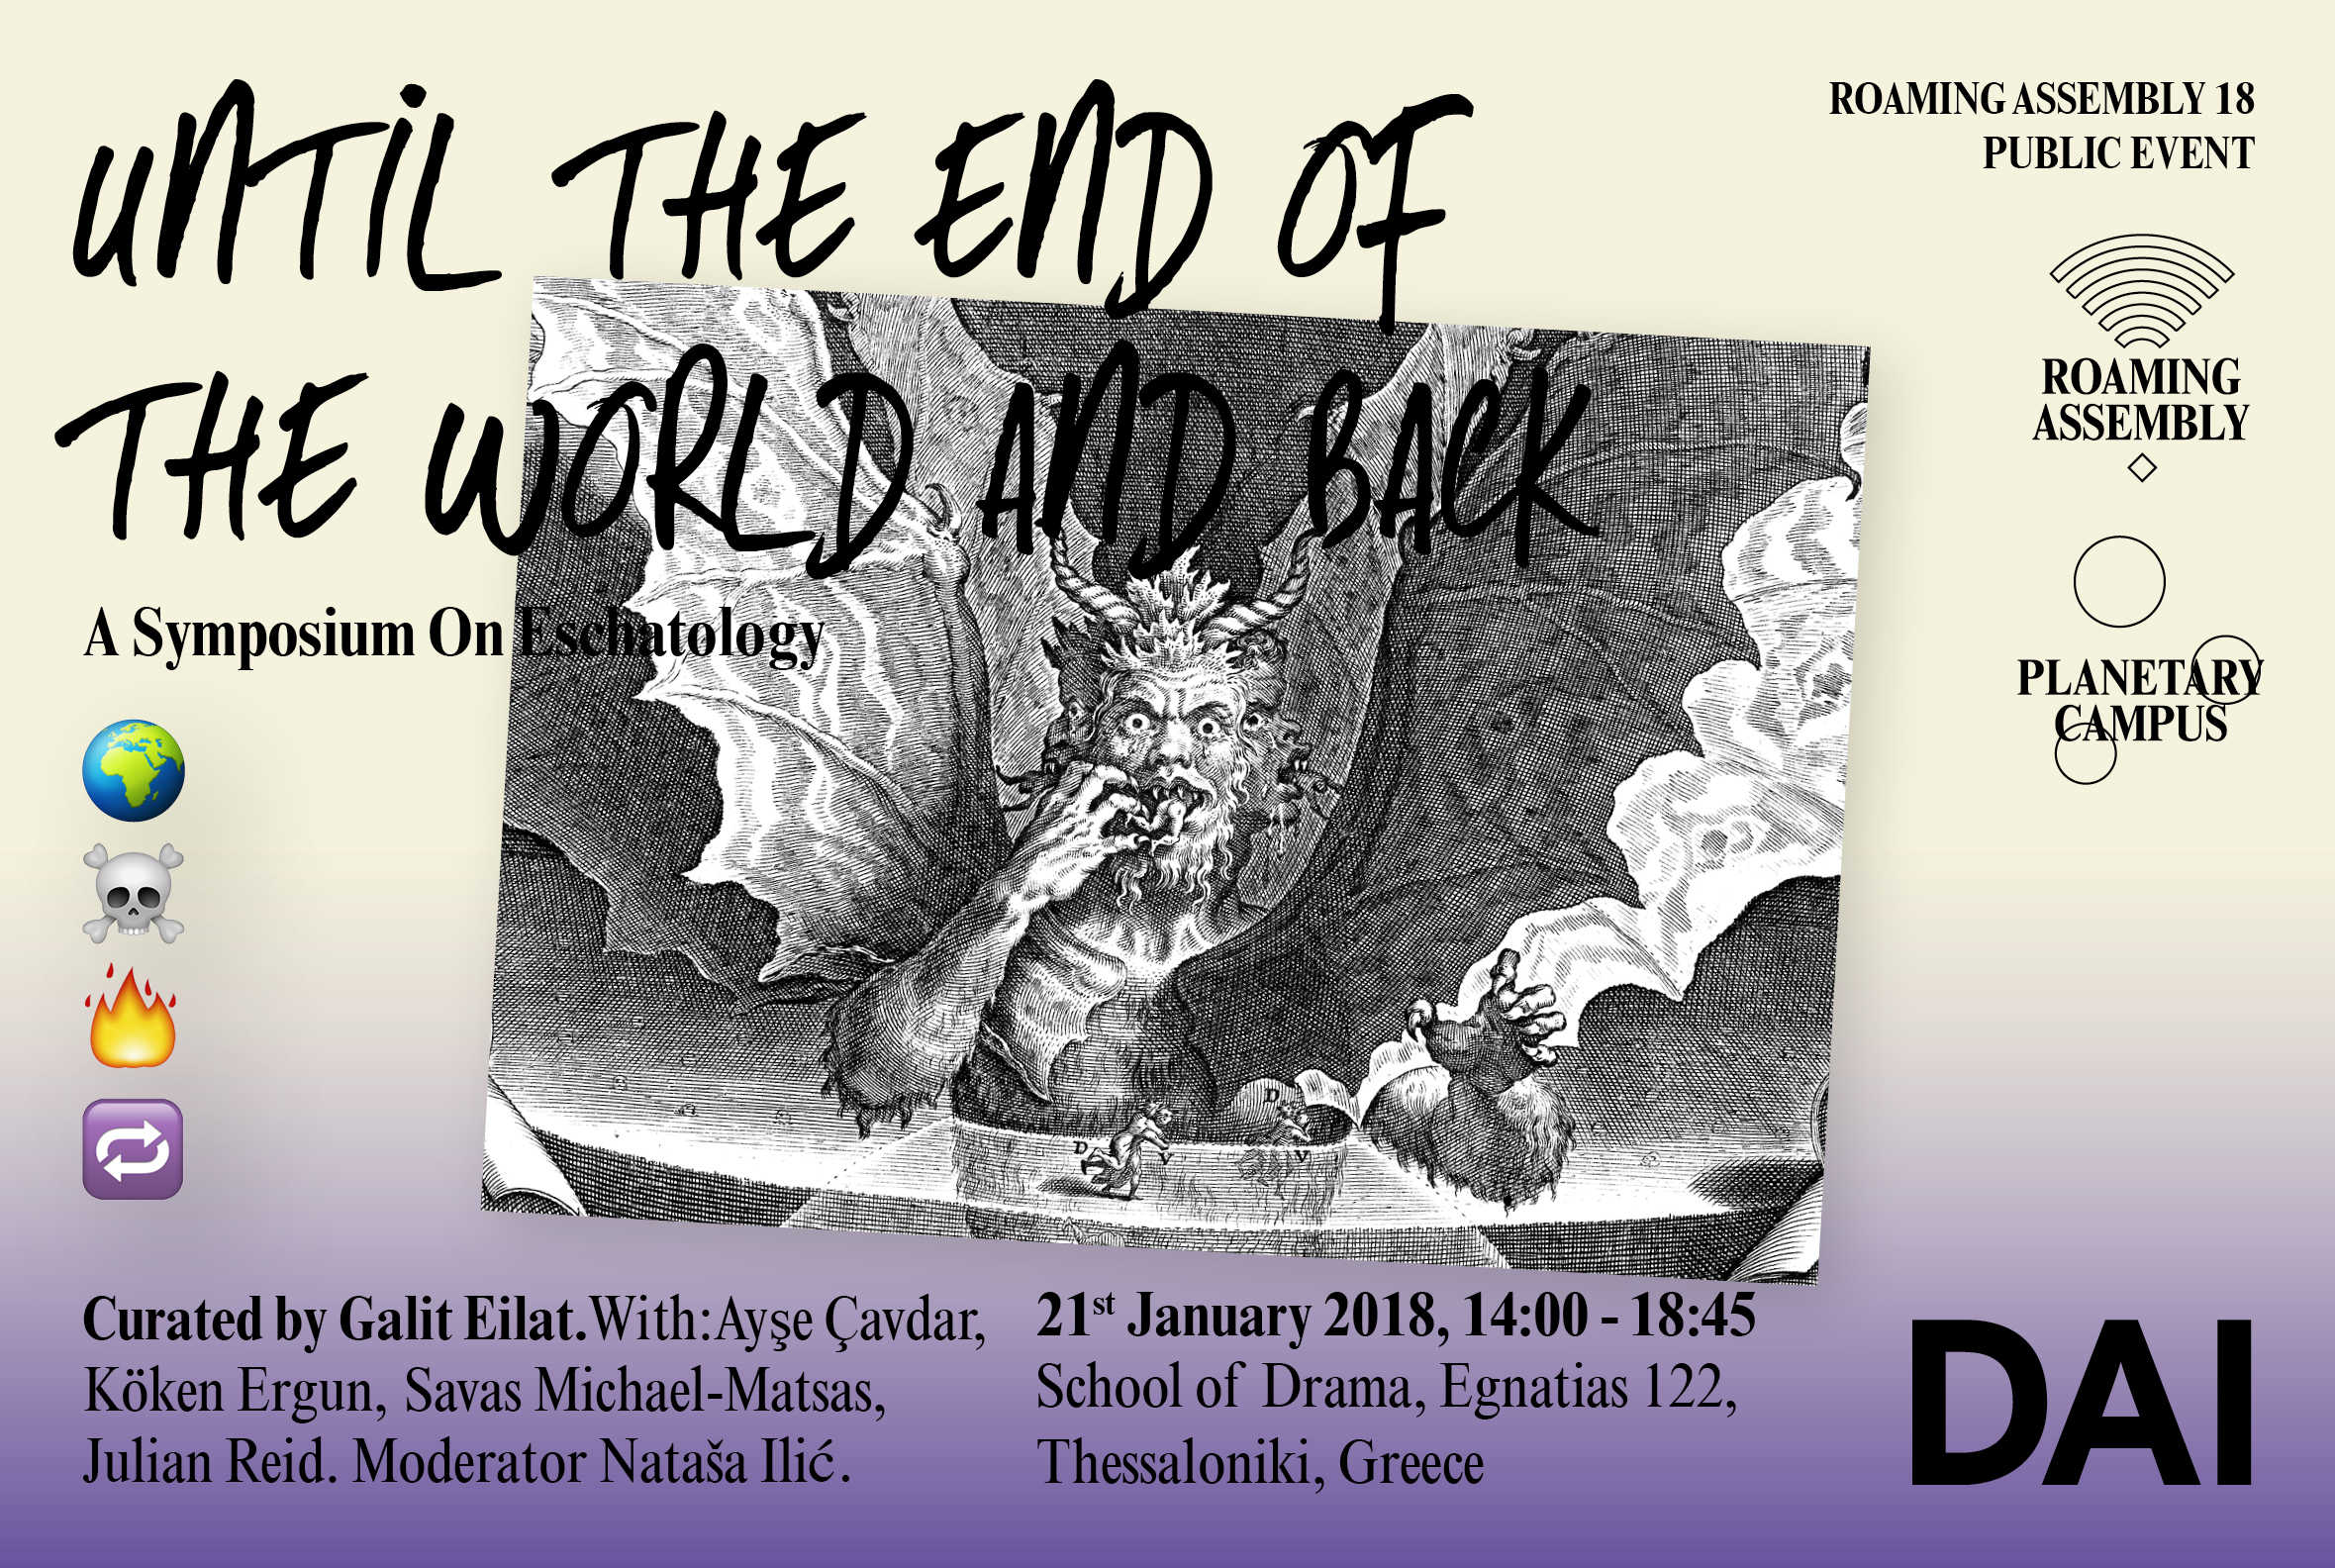 sunday-january-21-roaming-assembly-18-until-the-end-of-the-world-and-back